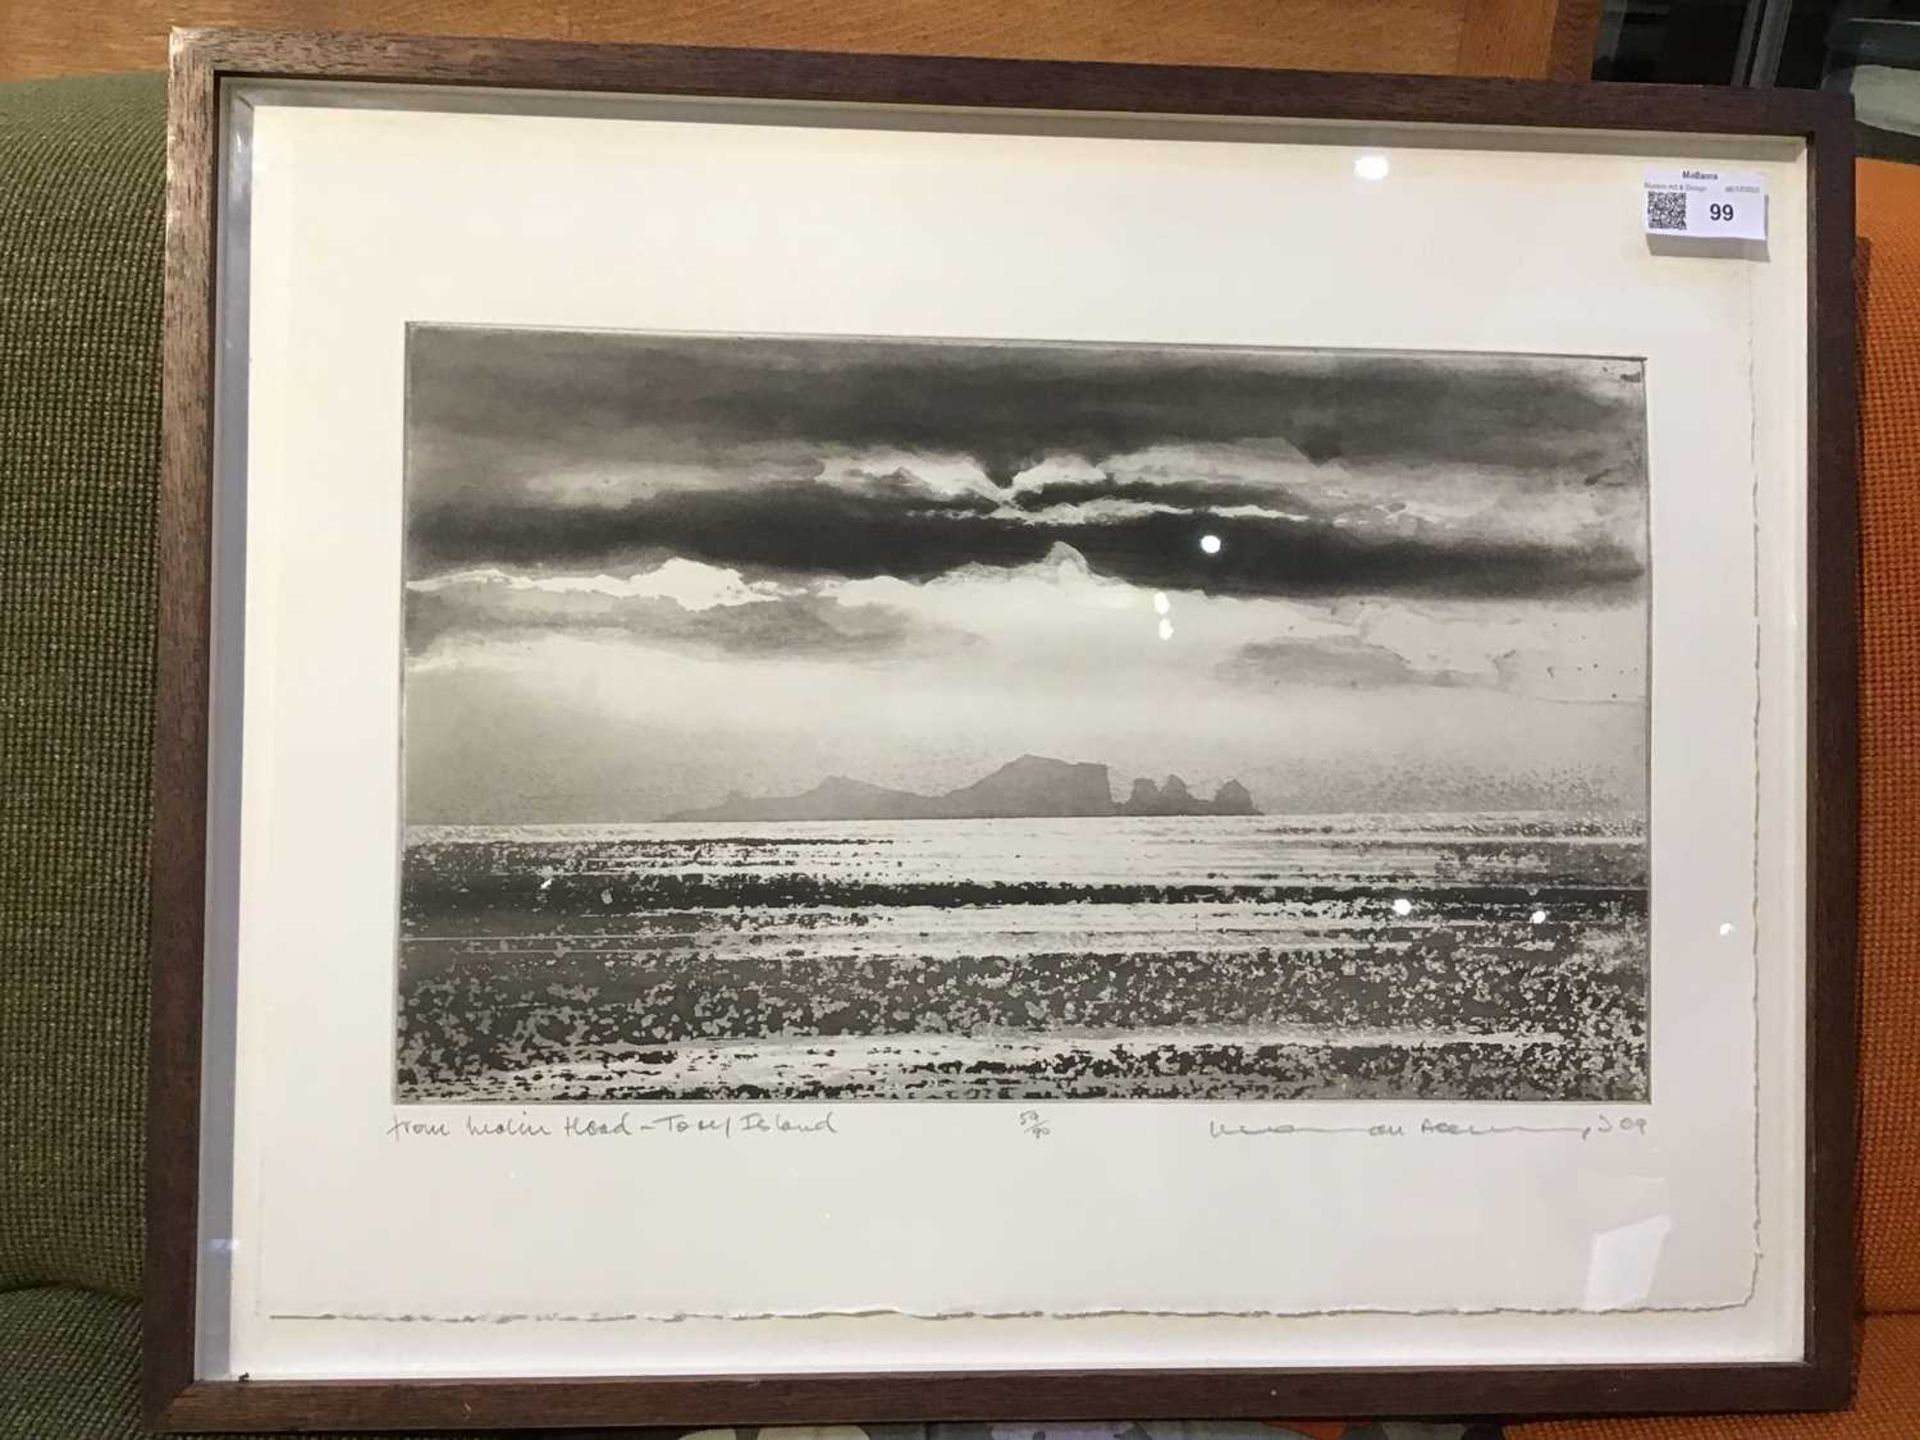 Norman Ackroyd (b.1938) From Malin Head - Toby Island, 2009 59/90, signed, dated, titled, and - Image 8 of 9